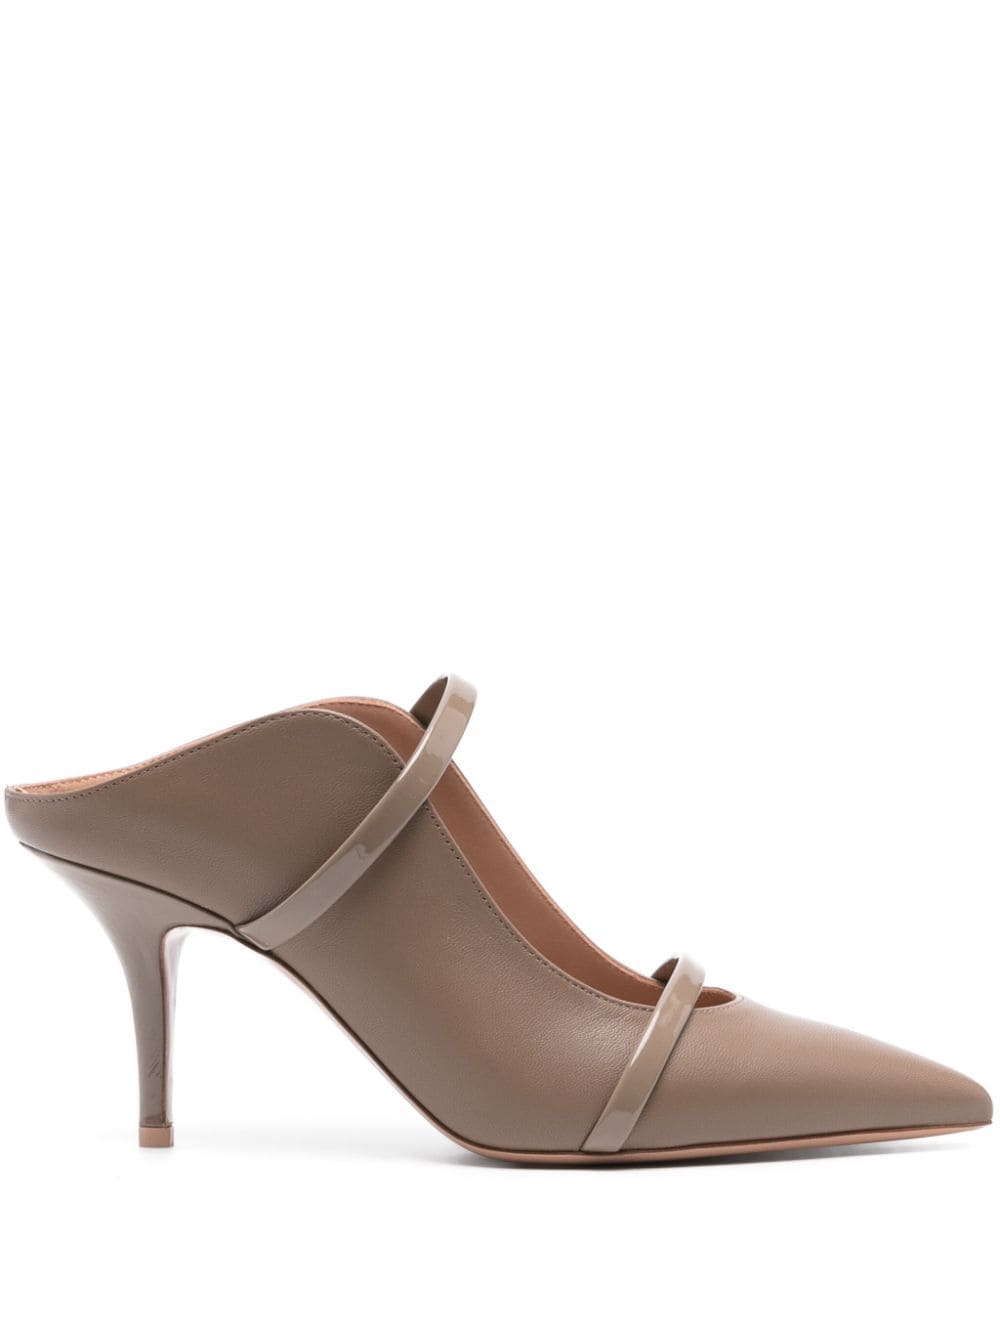 Malone Souliers Maureen 70mm leather mules - Neutrals von Malone Souliers